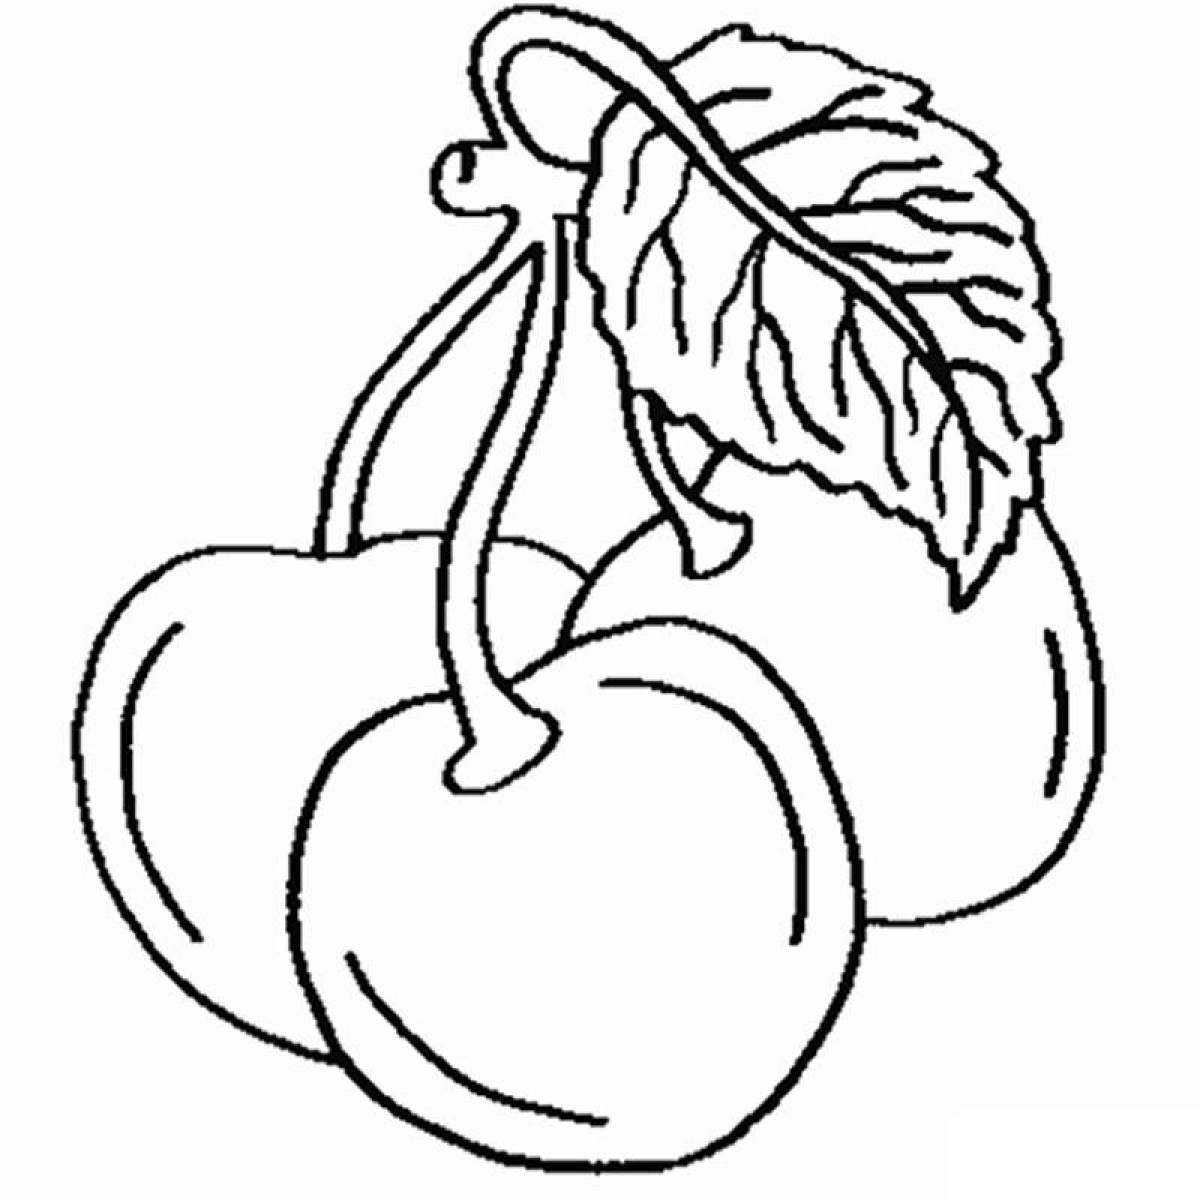 Exciting fruit coloring pages for 3-4 year olds